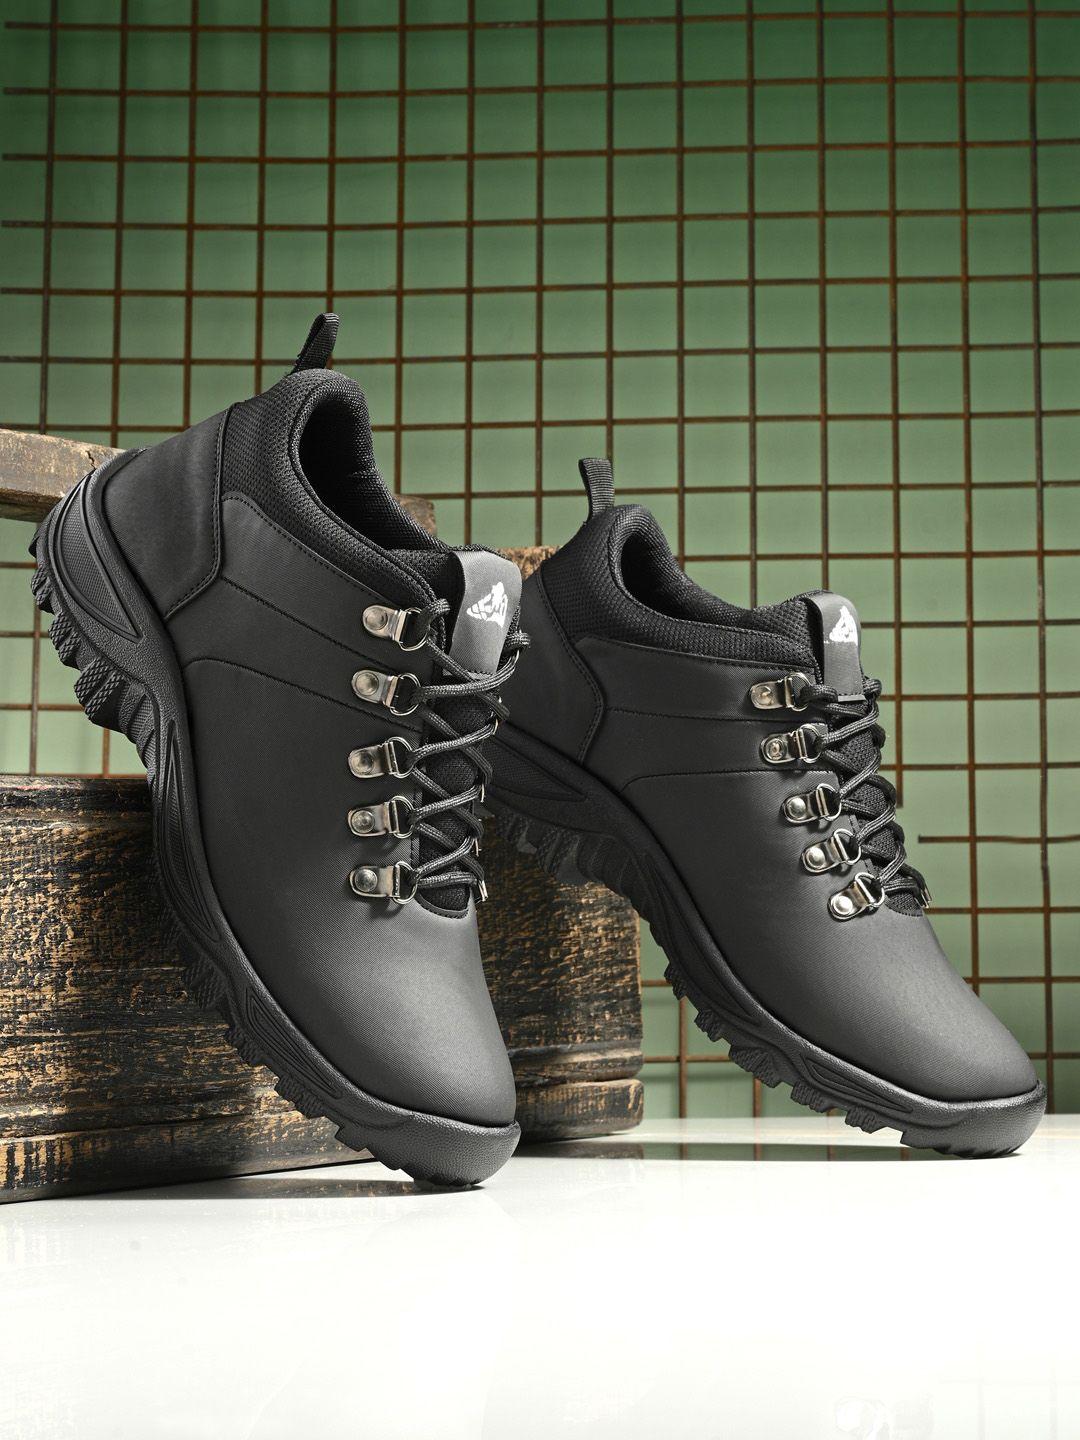 leo's fitness shoes men heeled hiking boots